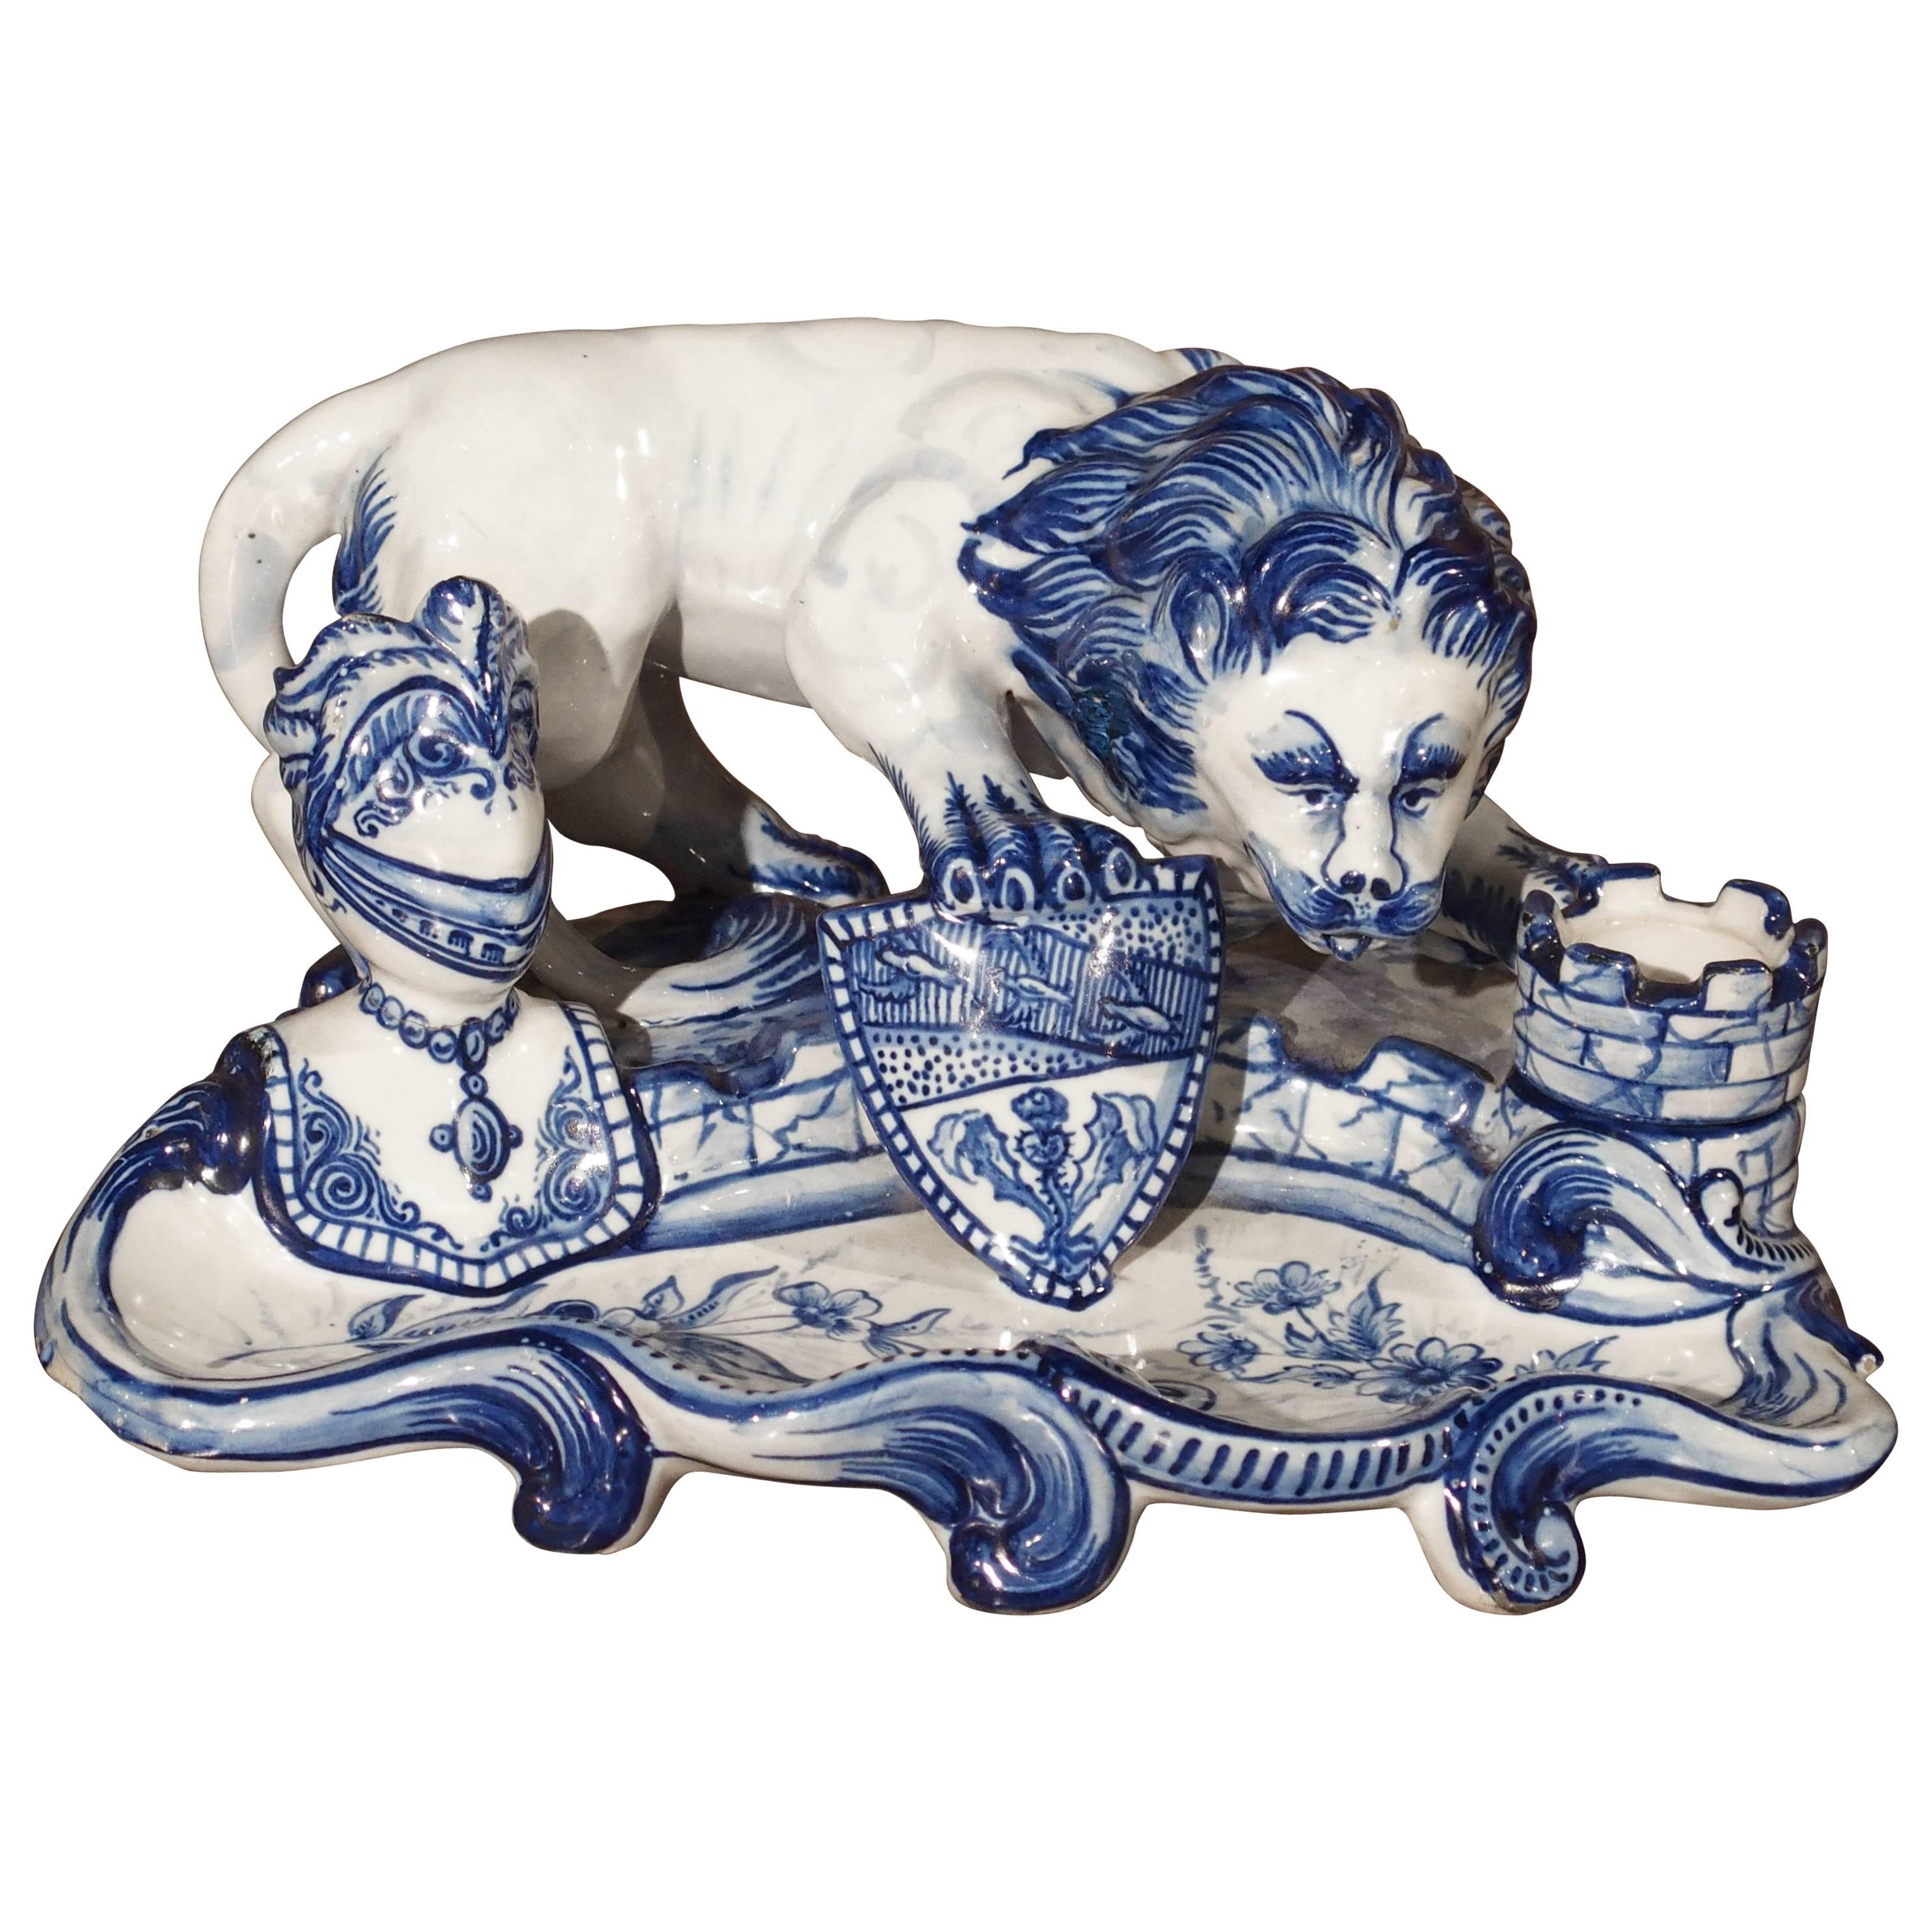 Early 1900s French Faience Inkwell in the Style of Emile Galle